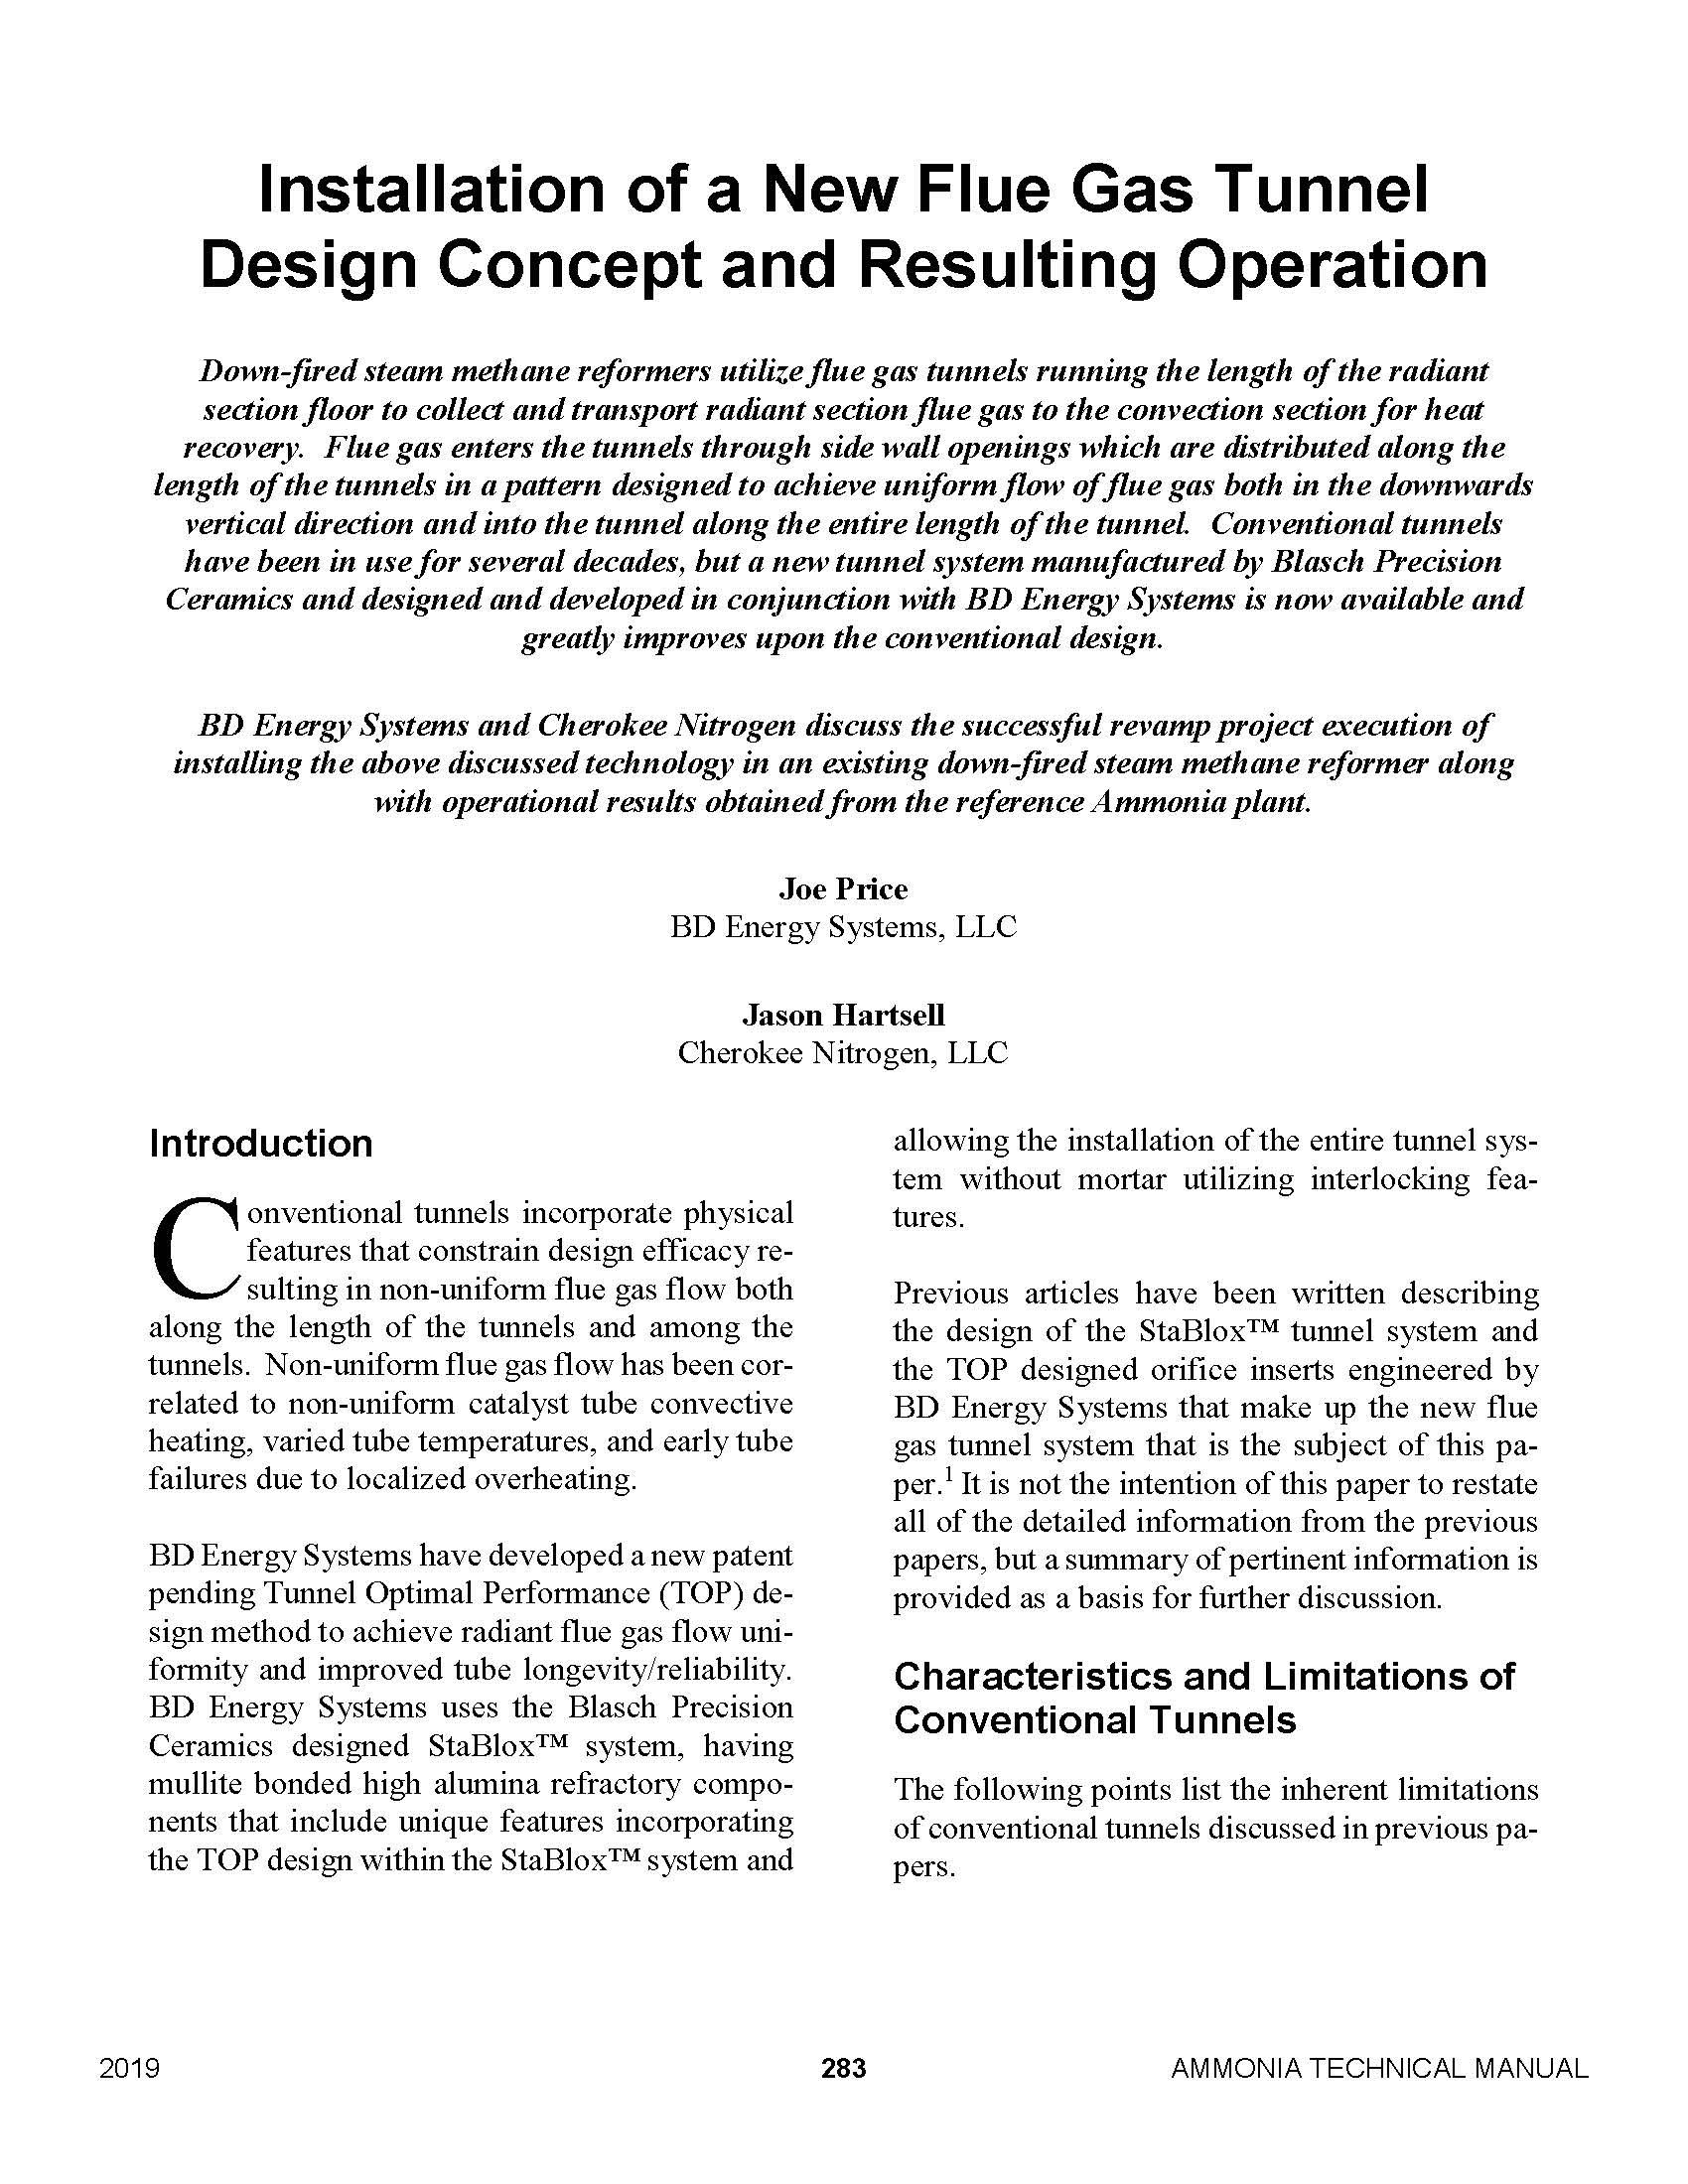 First page of "Installation of a New Flue Gas Tunnel Design Concept and Resulting Operation" white paper.